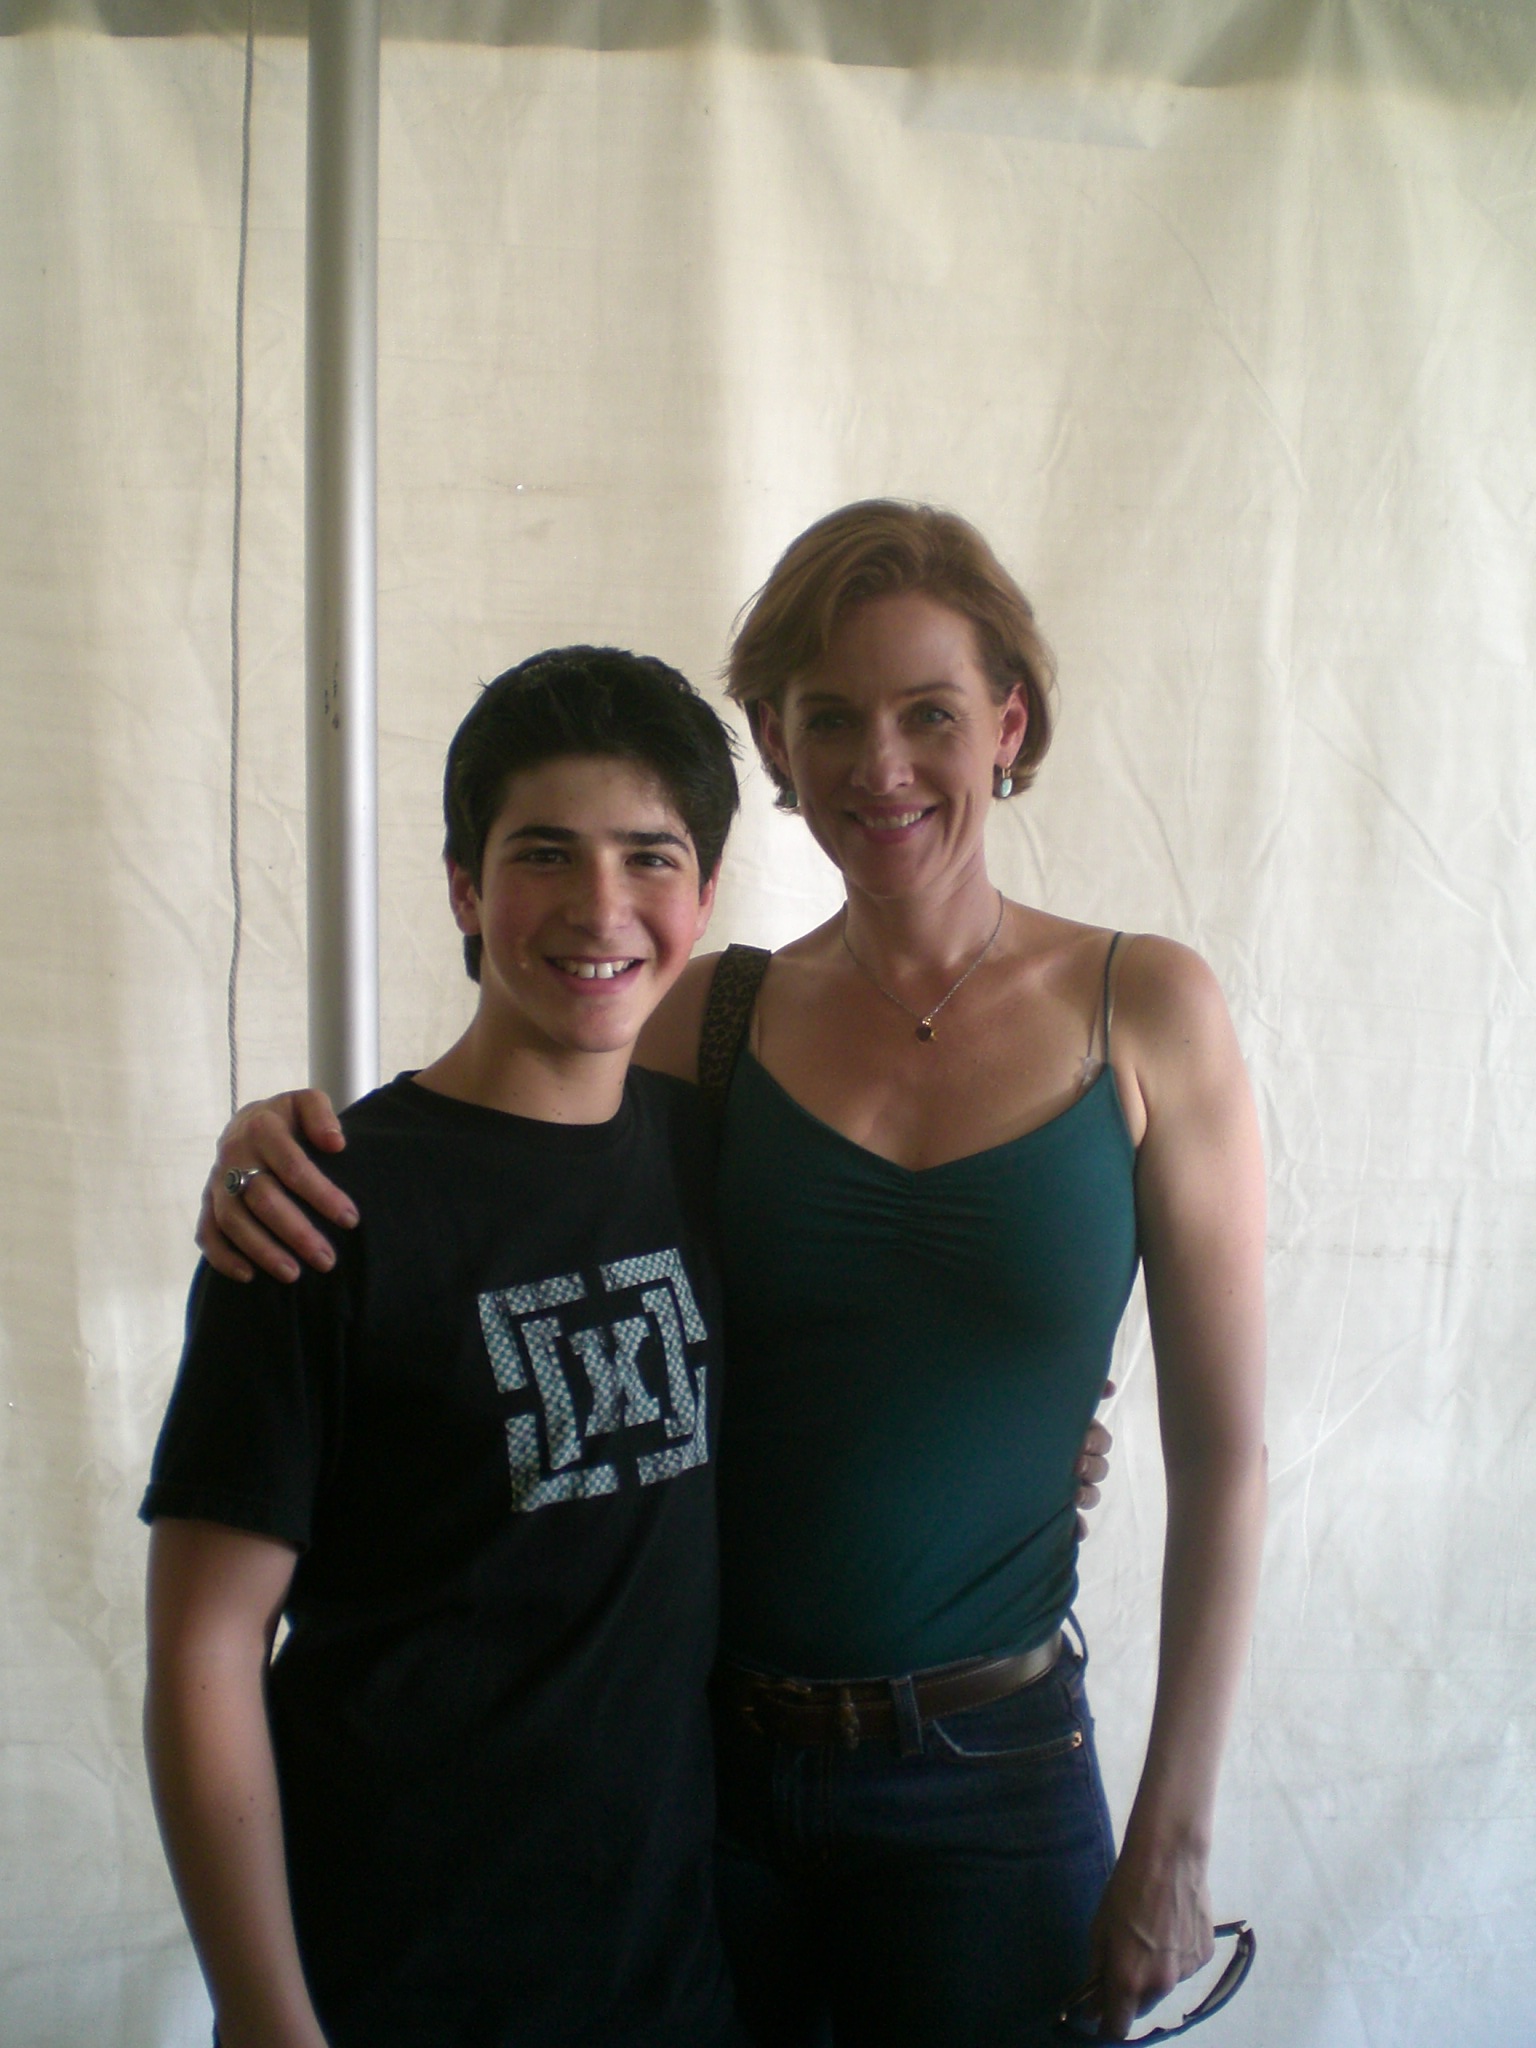 Penelope Ann Miller and I share a photo opportunity.